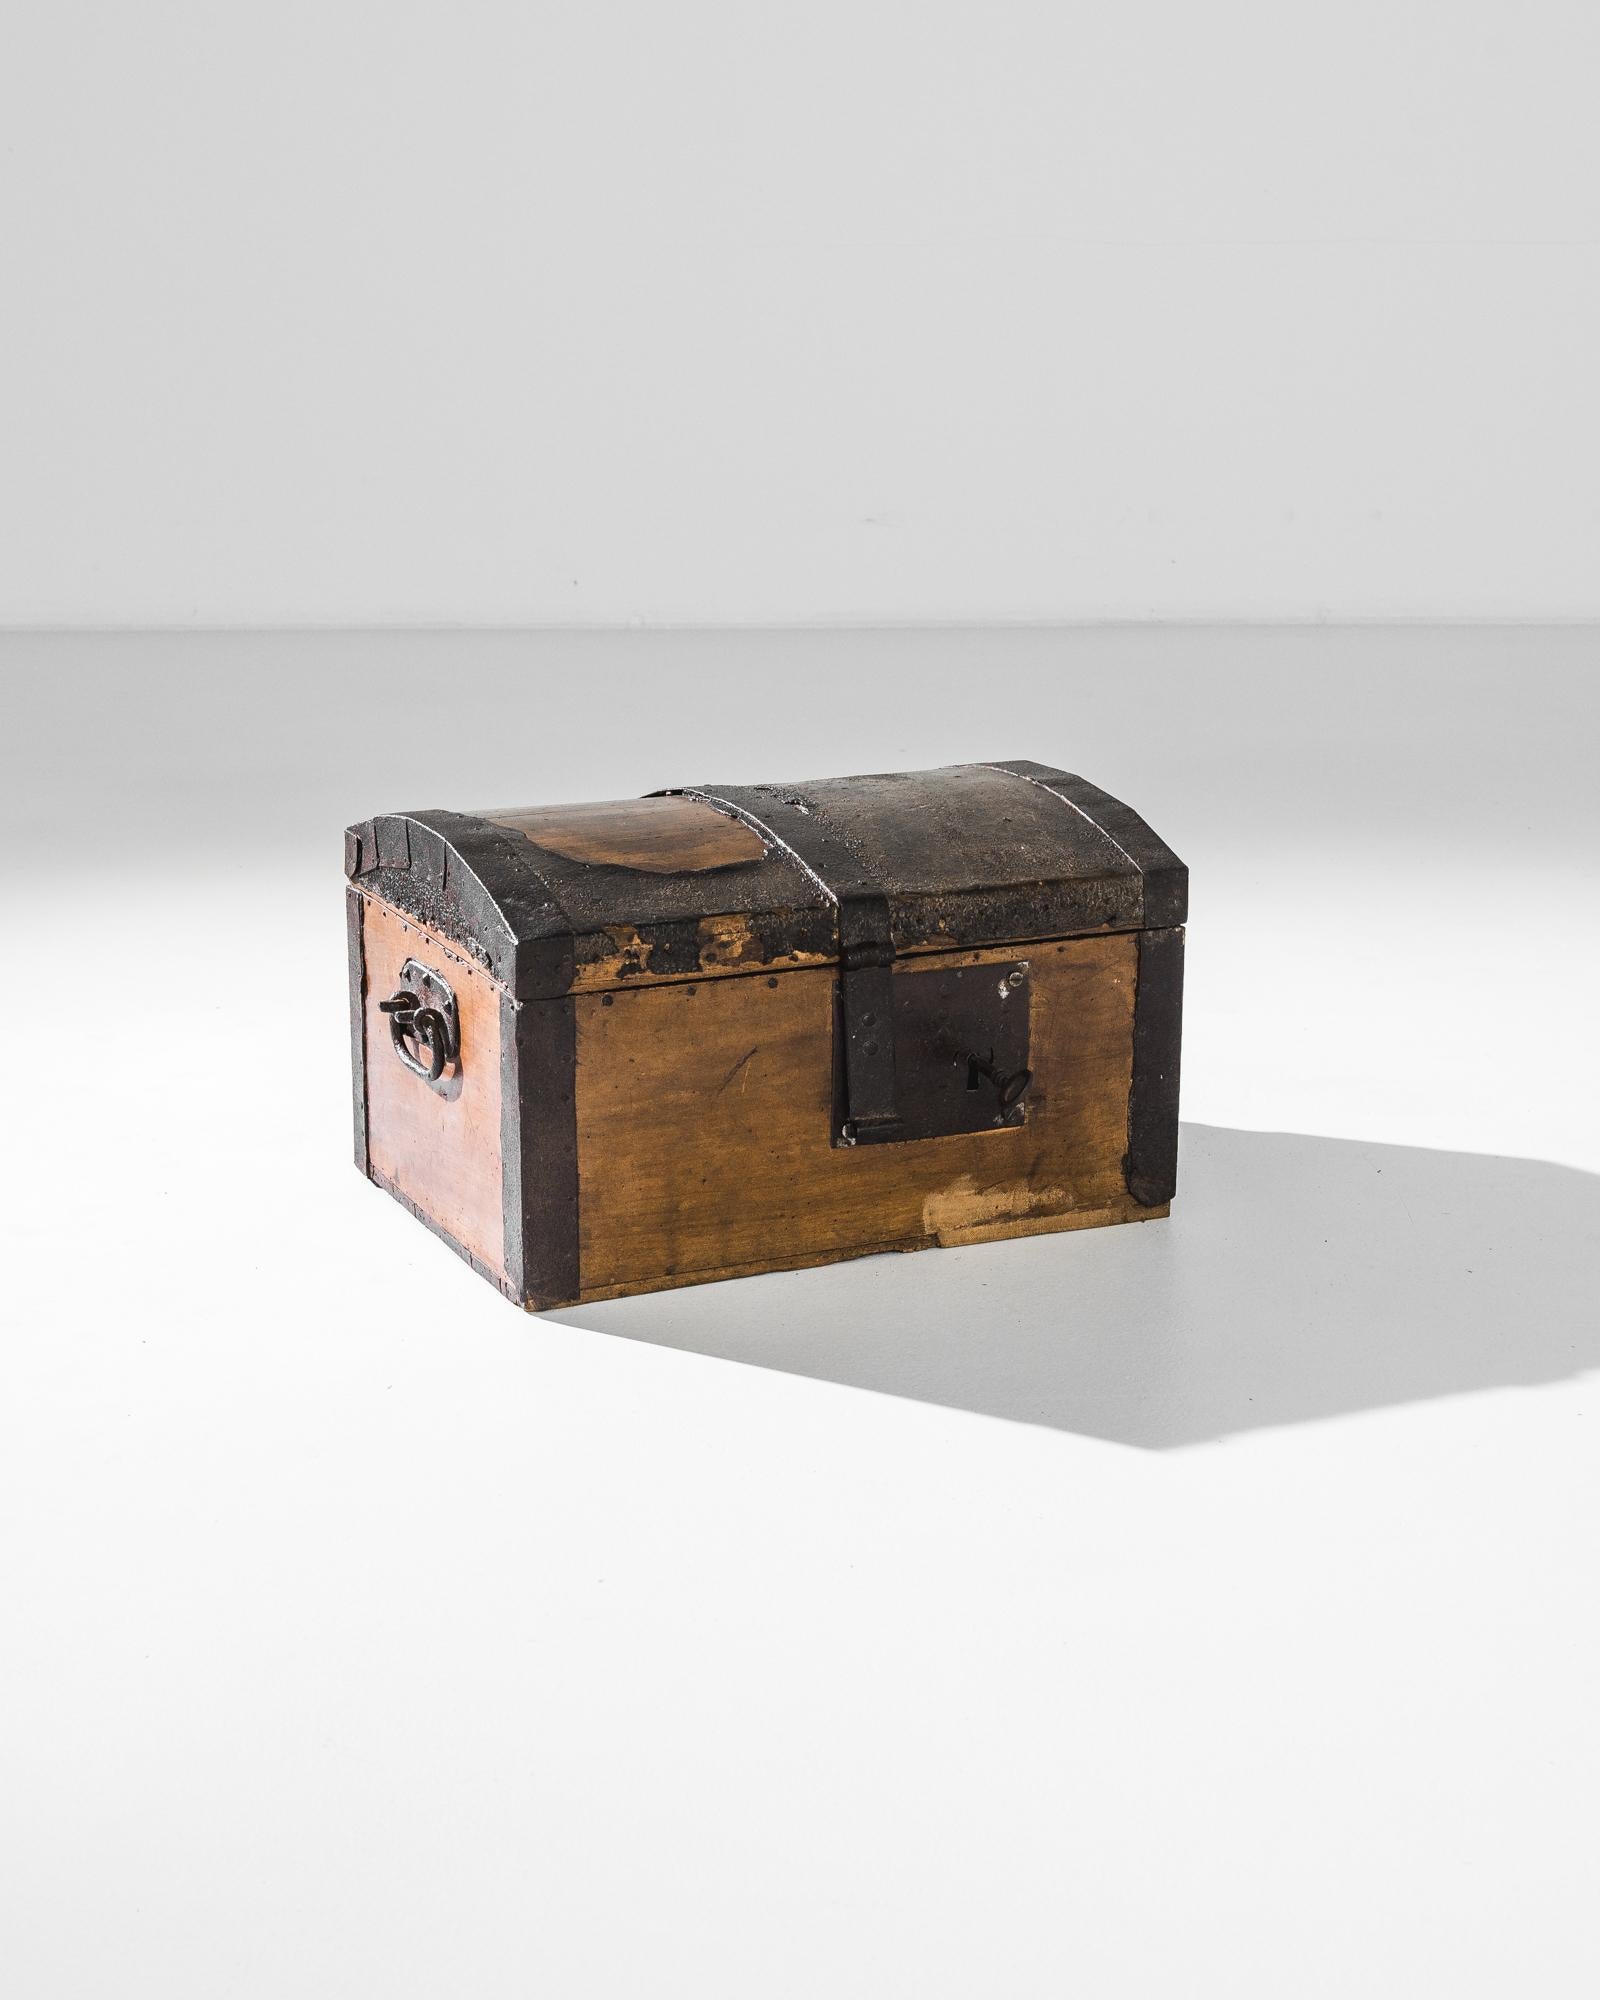 A wooden trunk from 1840s France. The arched lid, reinforced with iron bands, creates a treasure chest silhouette; the timeworn finish of the metal overlay accentuates the sense of mystery and romance. Drop handles on either side allow for ease of